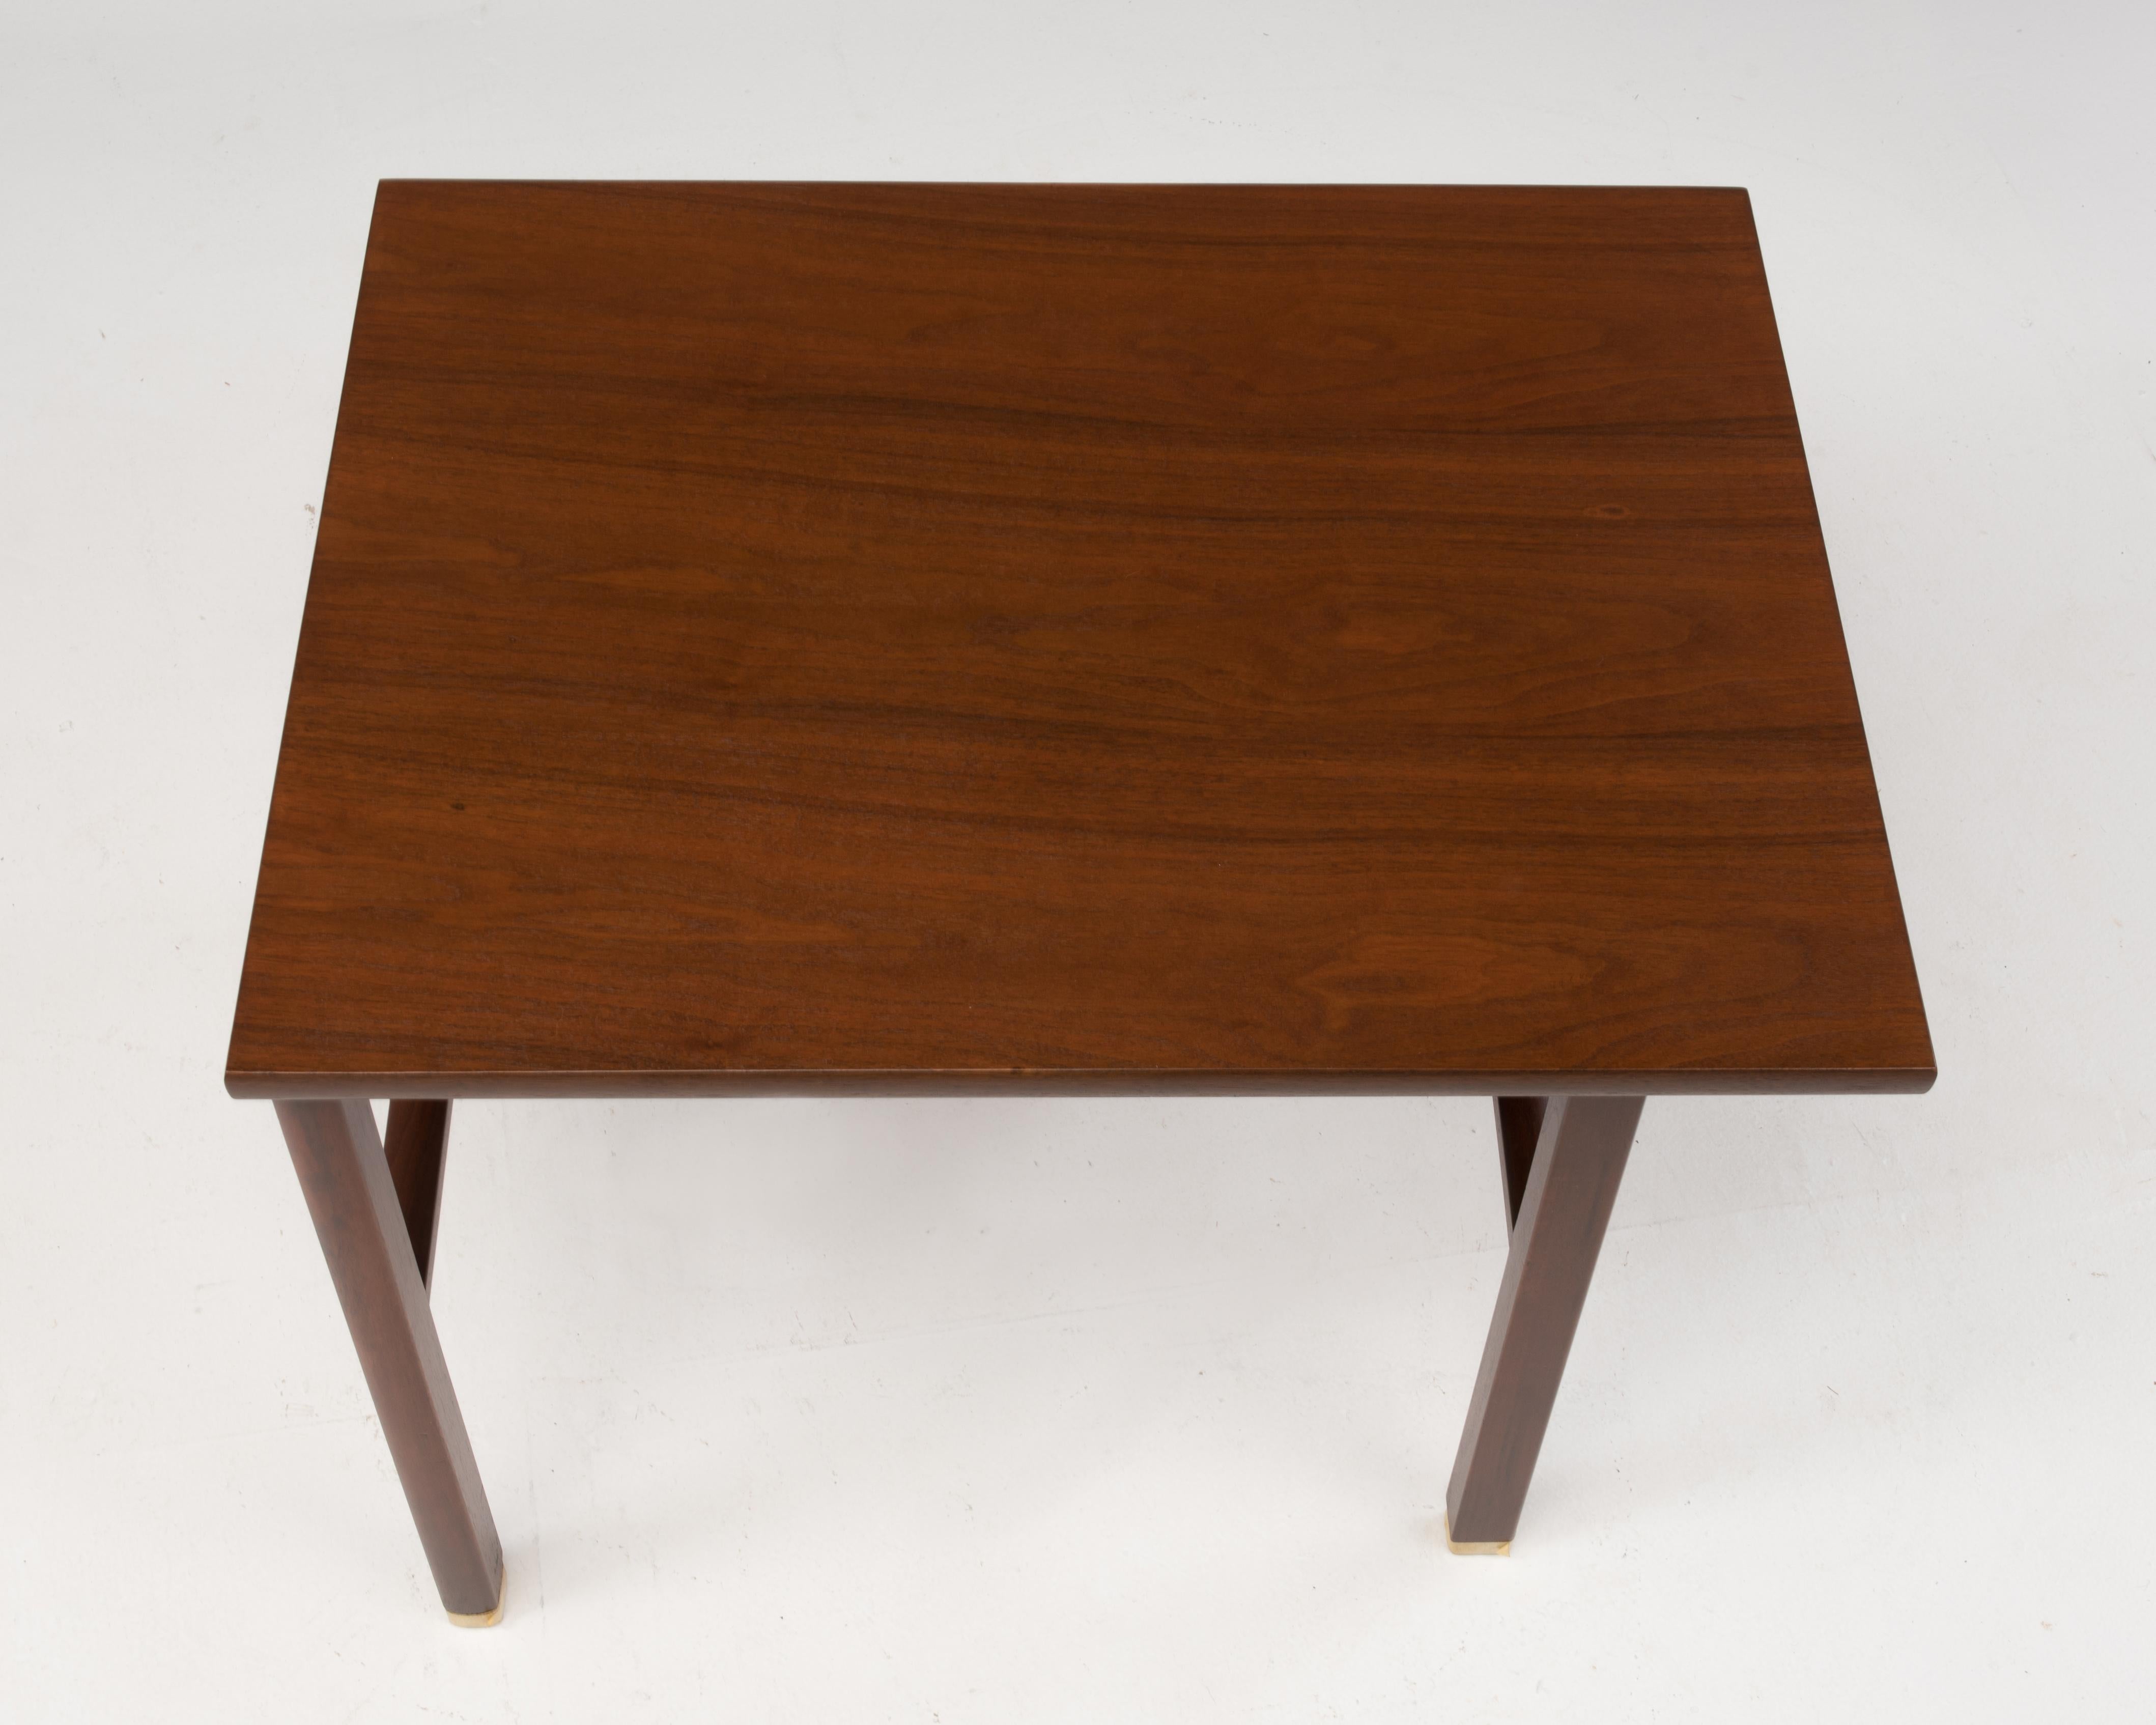 Cantilevered teak end table by Edward Wormley for Dunbar, circa 1960s. Features cantilevered top and brass feet. Retains the original Dunbar brass tags.